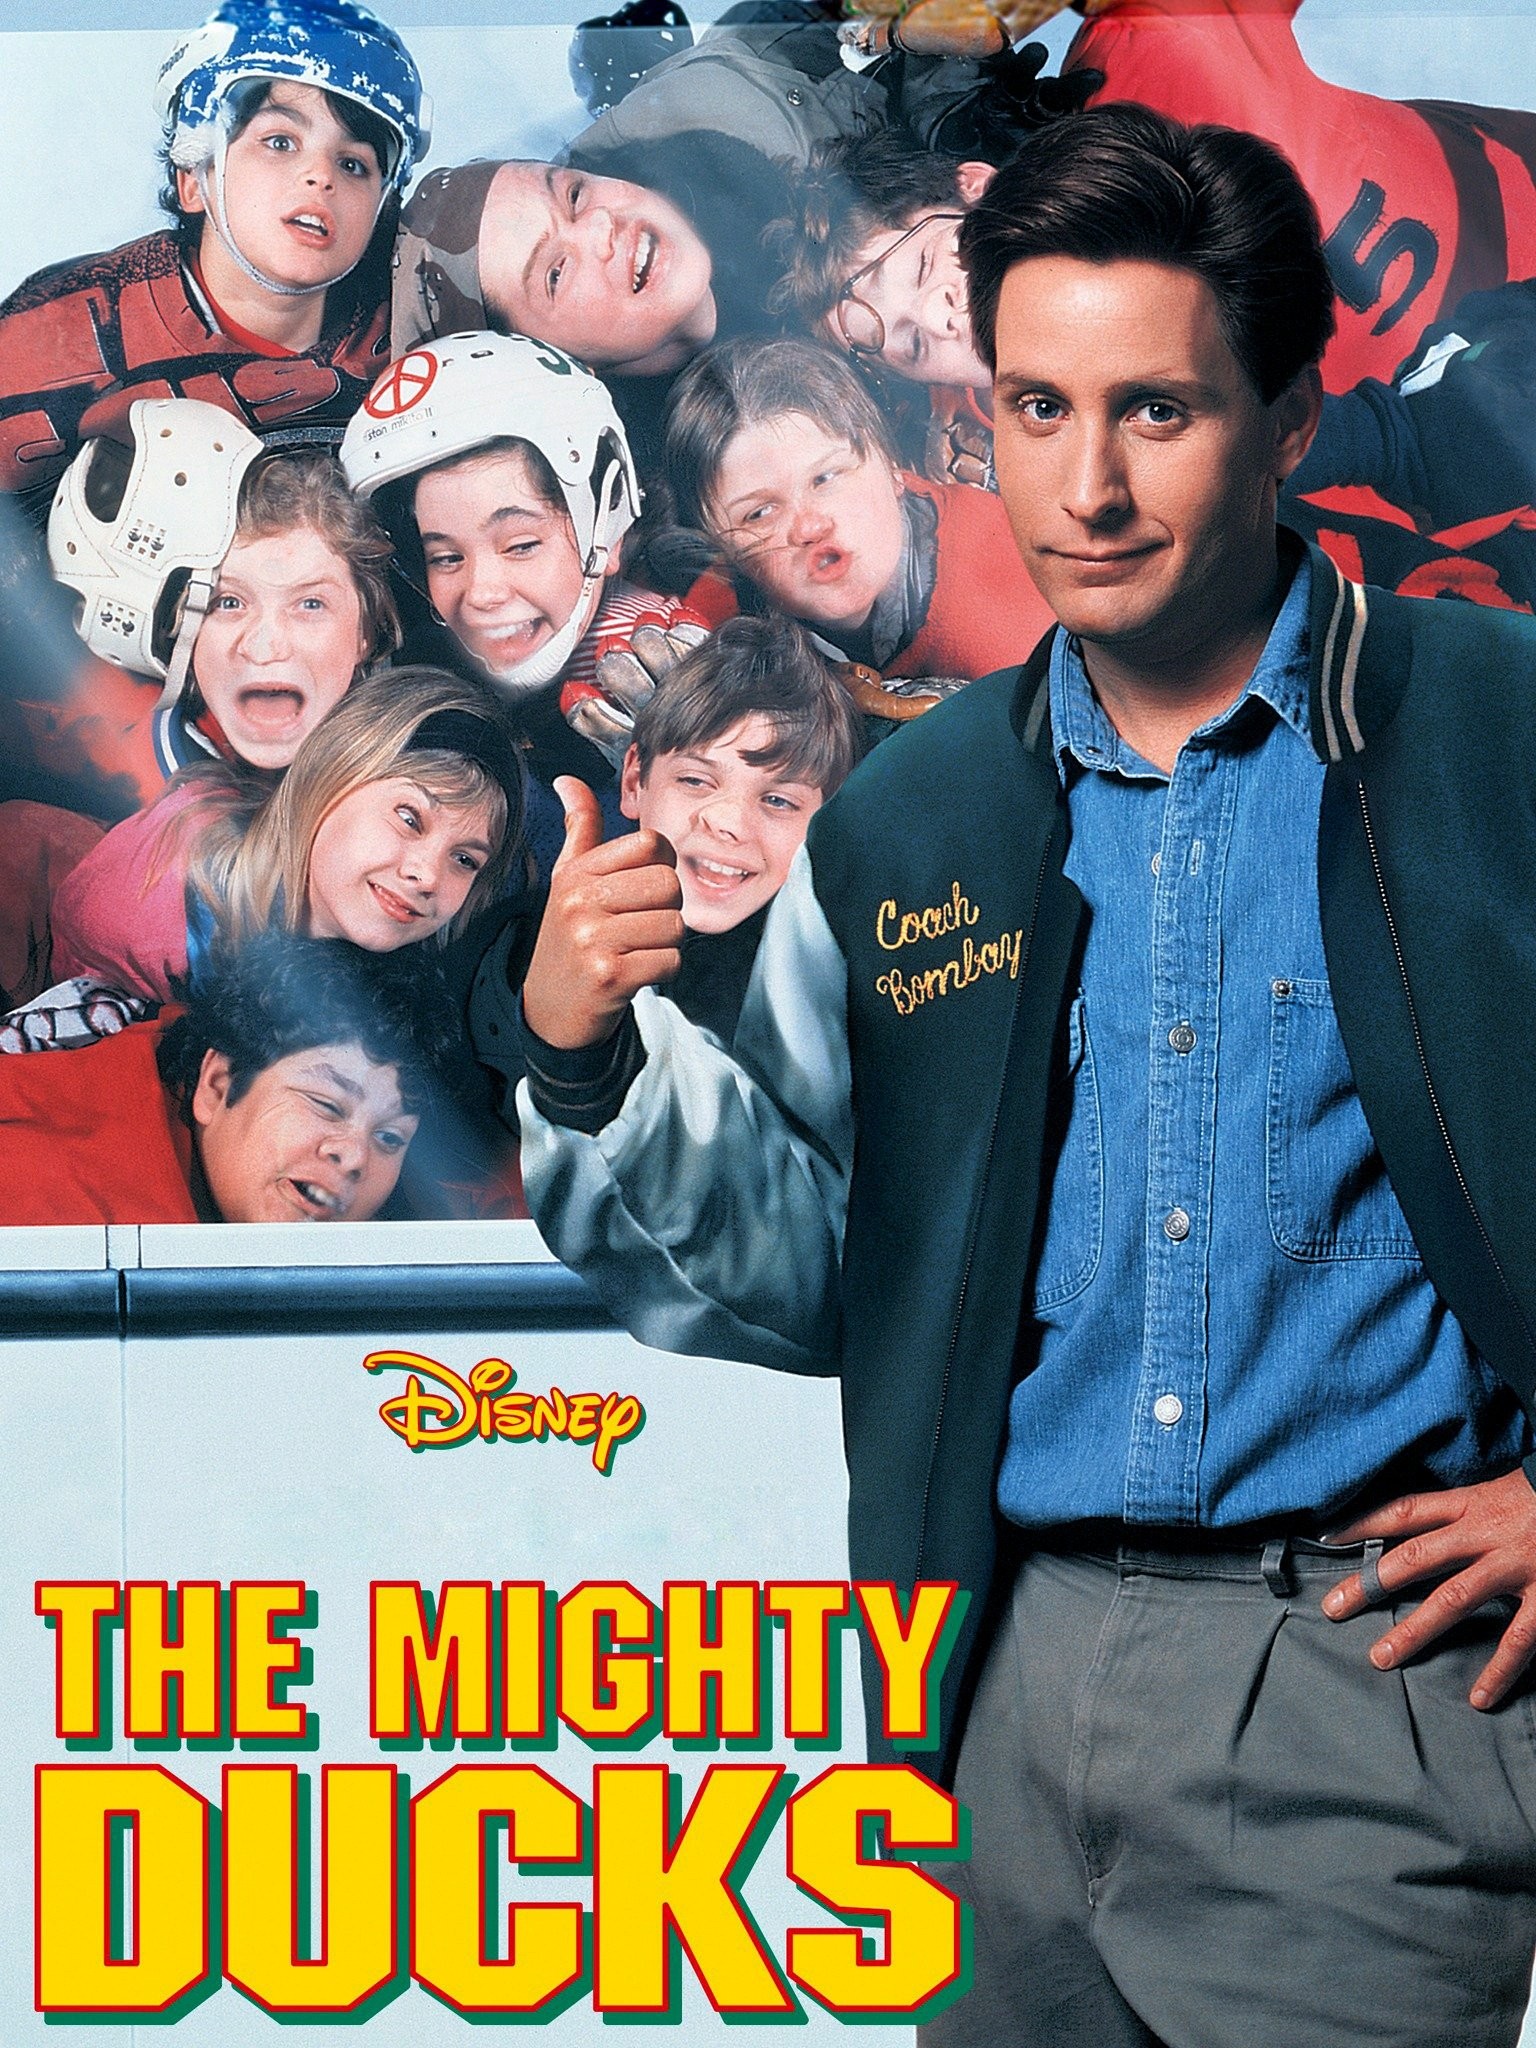 Here's what the cast of The Mighty Ducks is up to in 2017